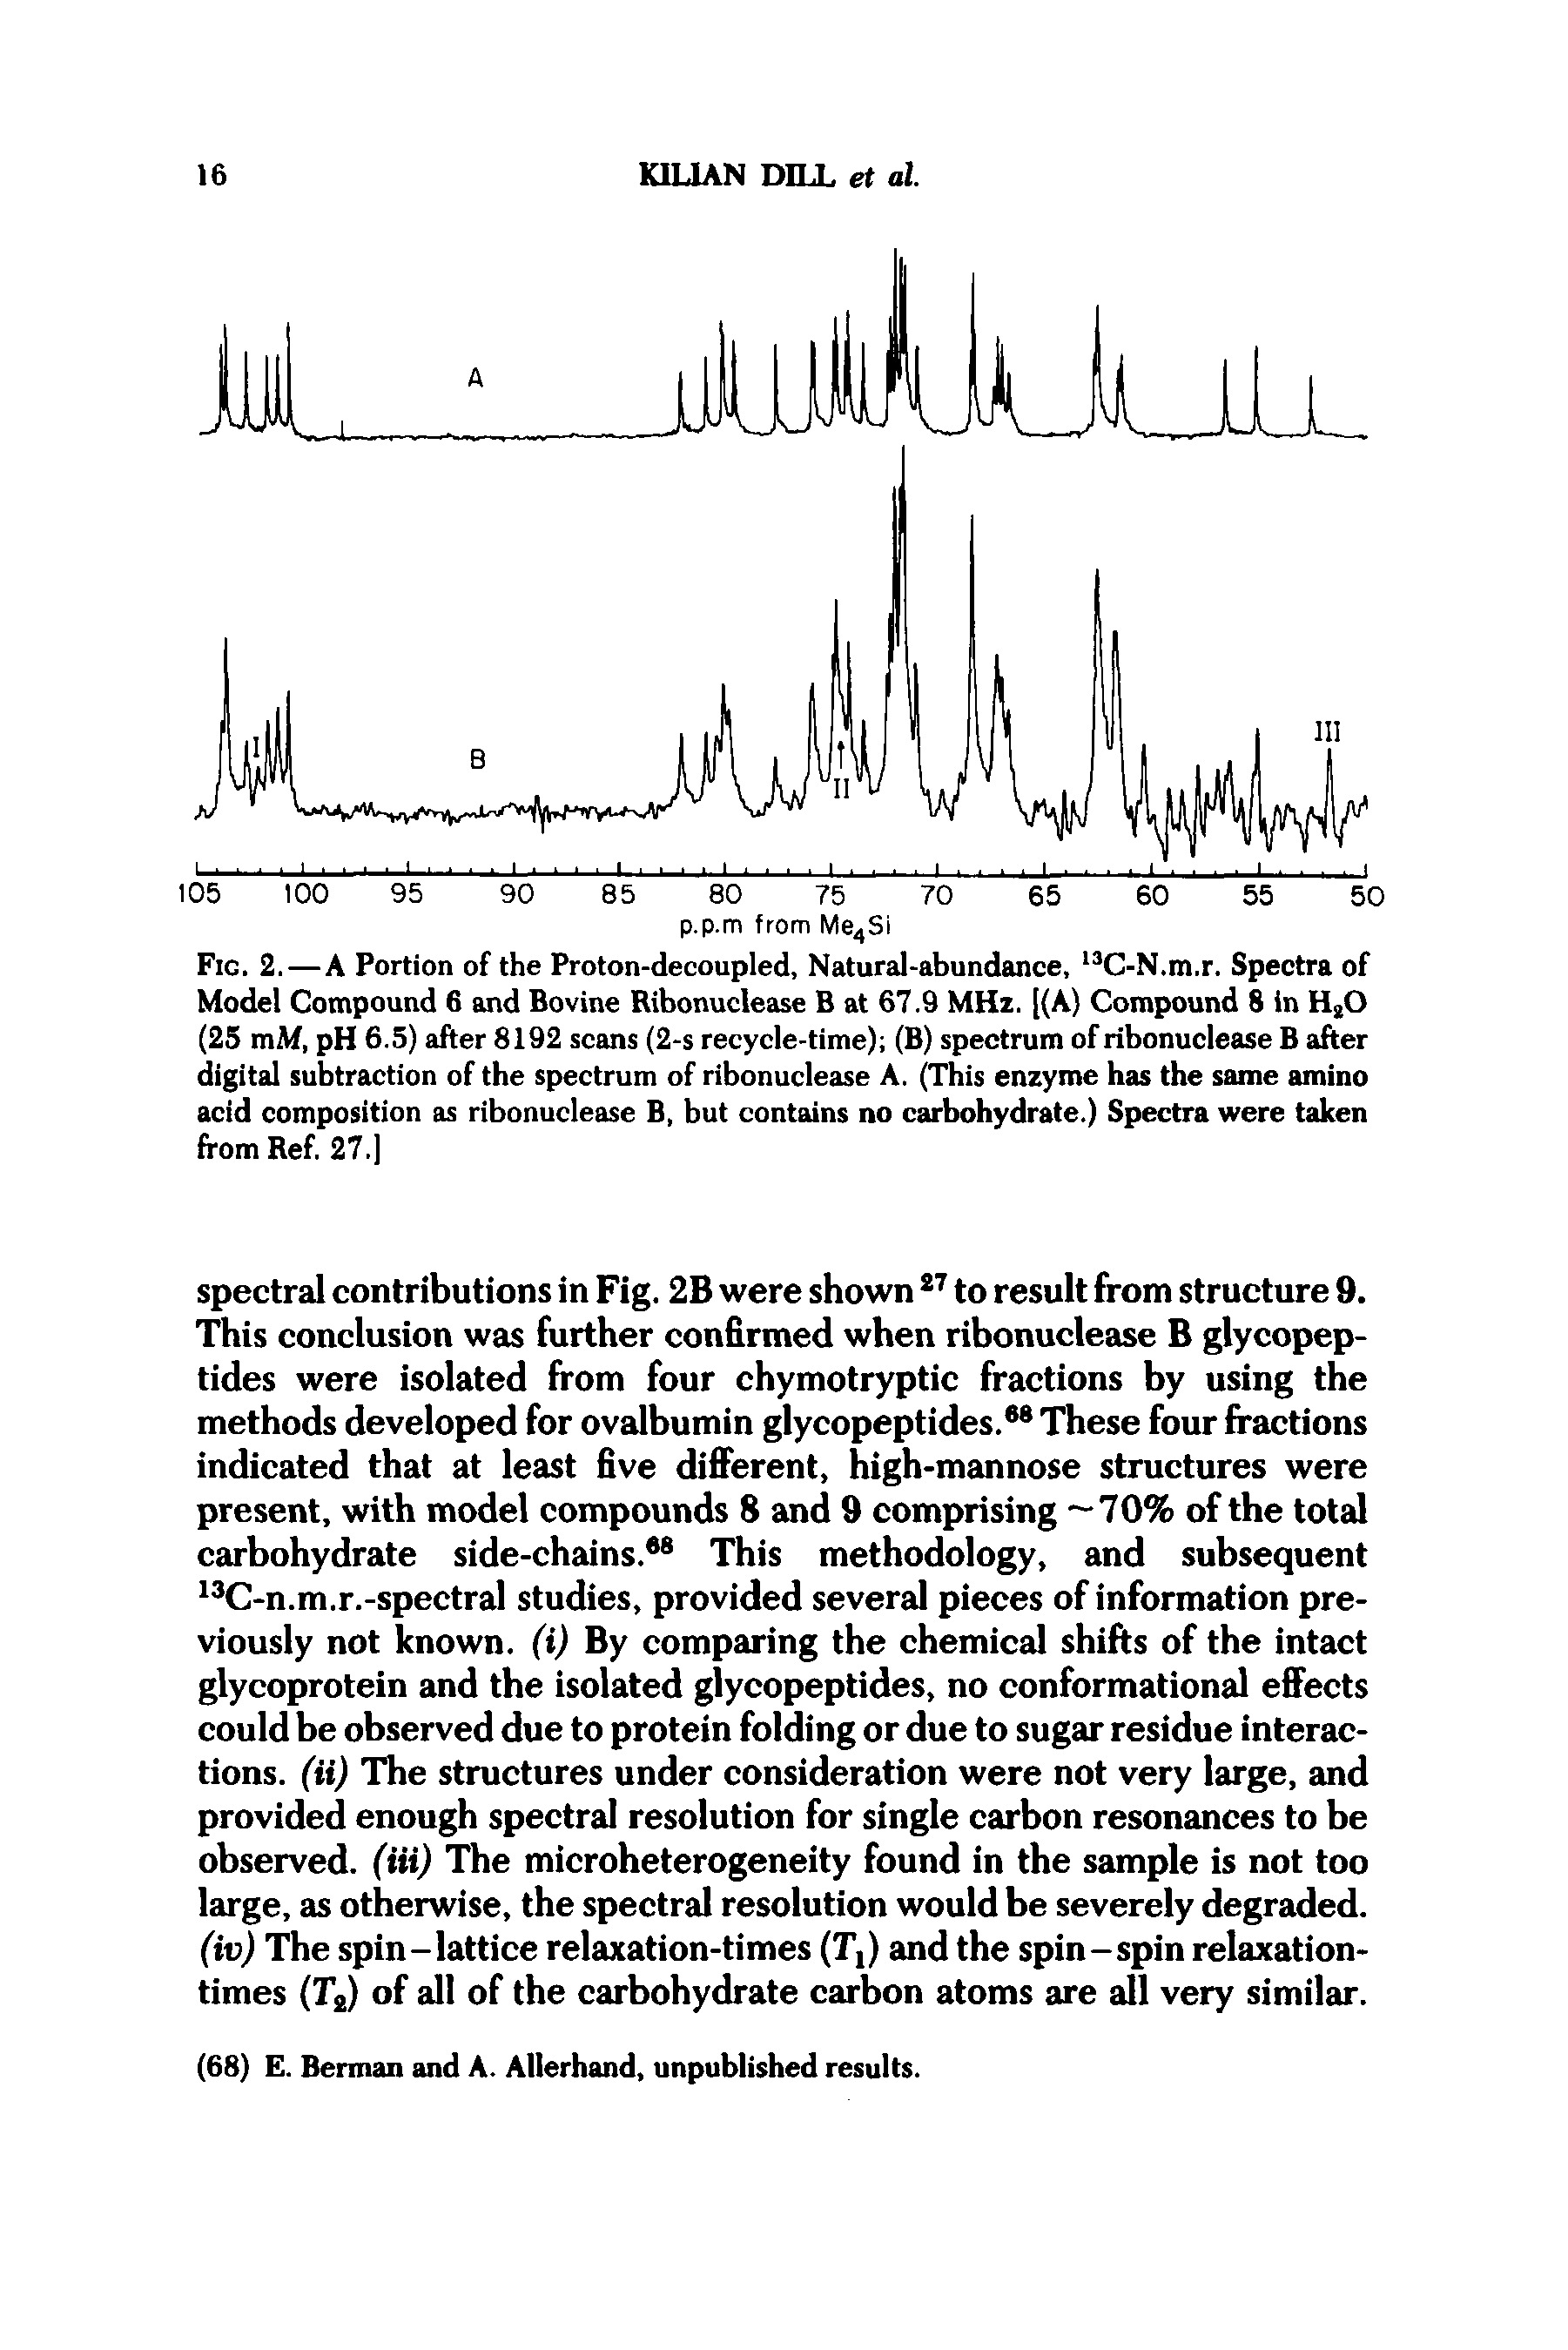 Fig. 2.—A Portion of the Proton-decoupled, Natural-abundance, 13C-N.m.r. Spectra of Model Compound 6 and Bovine Ribonuclease B at 67.9 MHz. [(A) Compound 8 in HzO (25 mM, pH 6.5) after 8192 scans (2-s recycle-time) (B) spectrum of ribonuclease B after digital subtraction of the spectrum of ribonuclease A. (This enzyme has the same amino acid composition as ribonuclease B, but contains no carbohydrate.) Spectra were taken from Ref. 27.1...